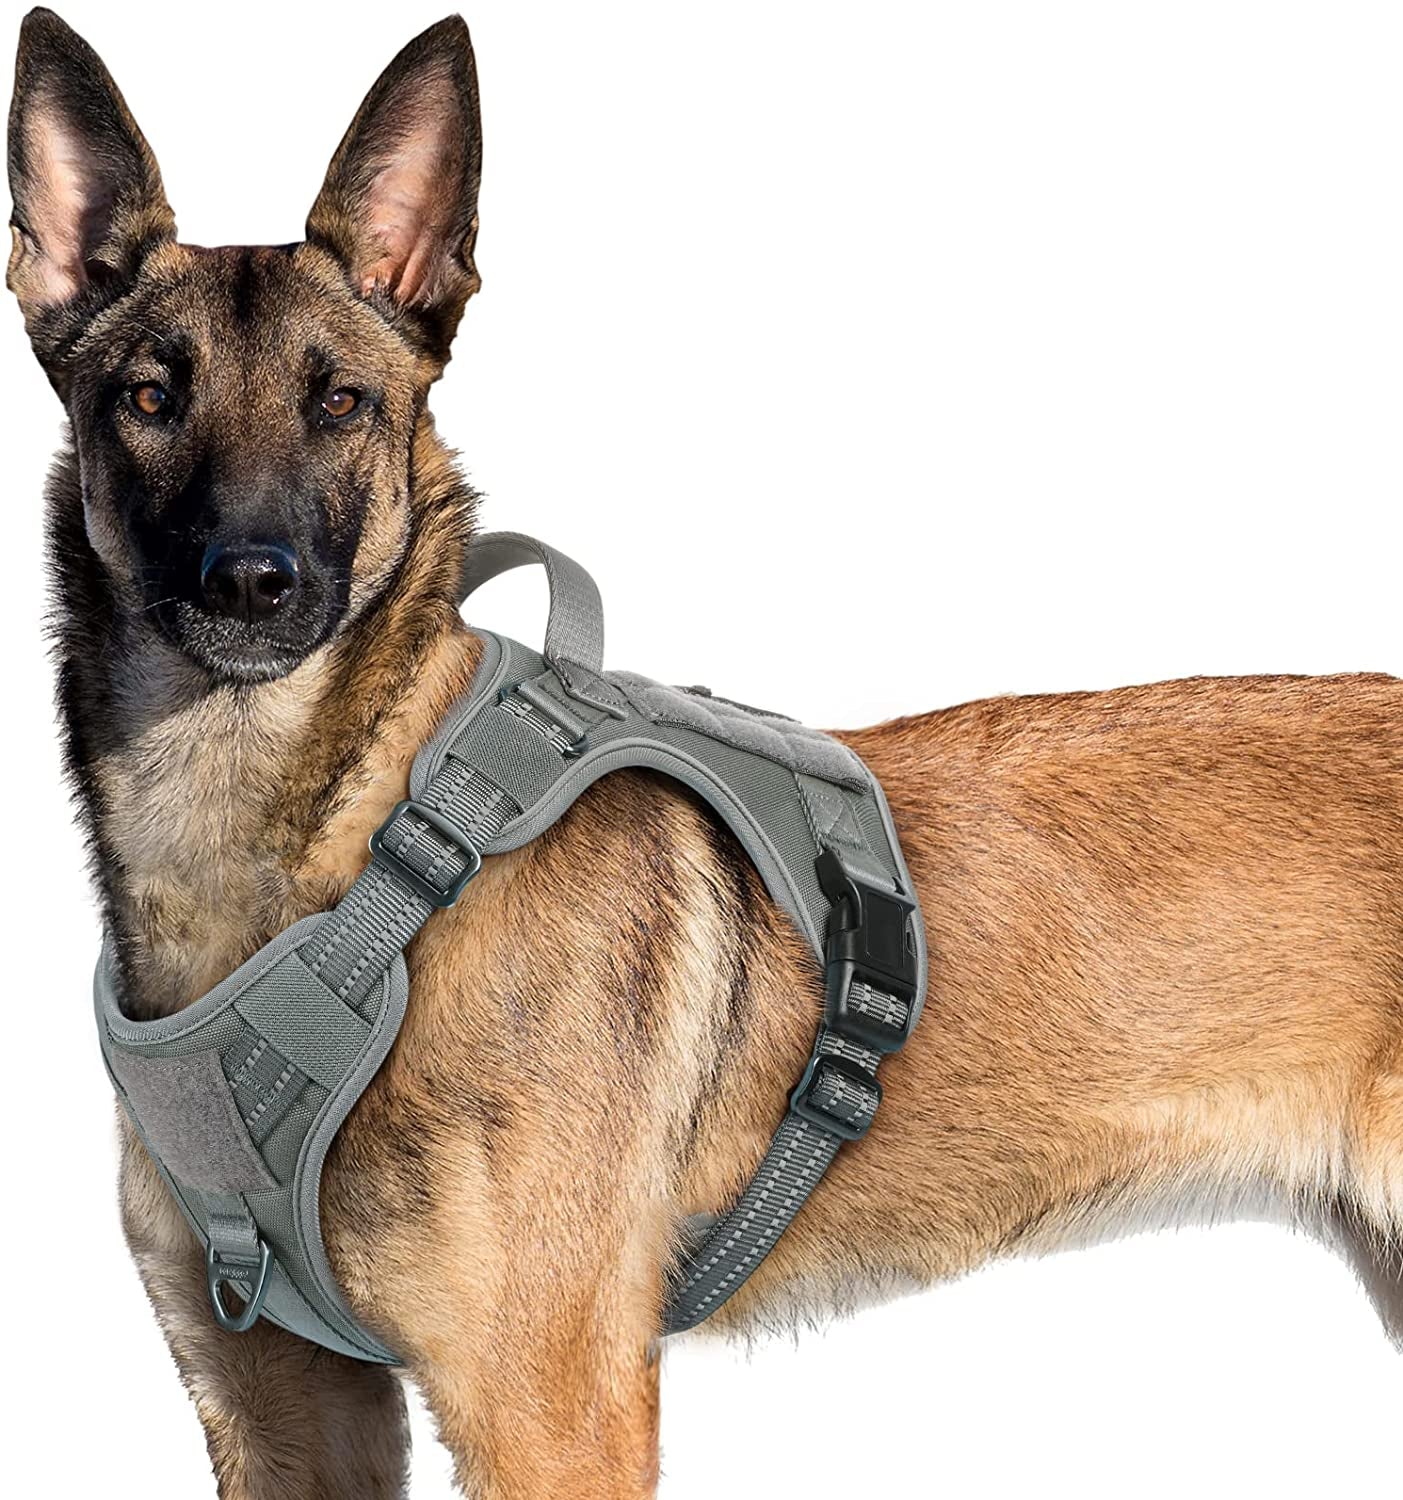 Rabbitgoo Tactical Dog Harness No Pull, Military Dog Vest Harness with Handle & Molle, Easy Control Service Dog Harness for Large Dogs Training Walking, Adjustable Reflective Pet Harness, Black, L Animals & Pet Supplies > Pet Supplies > Dog Supplies > Dog Apparel GLOBEGOU CO.,LTD Grey X-Large 